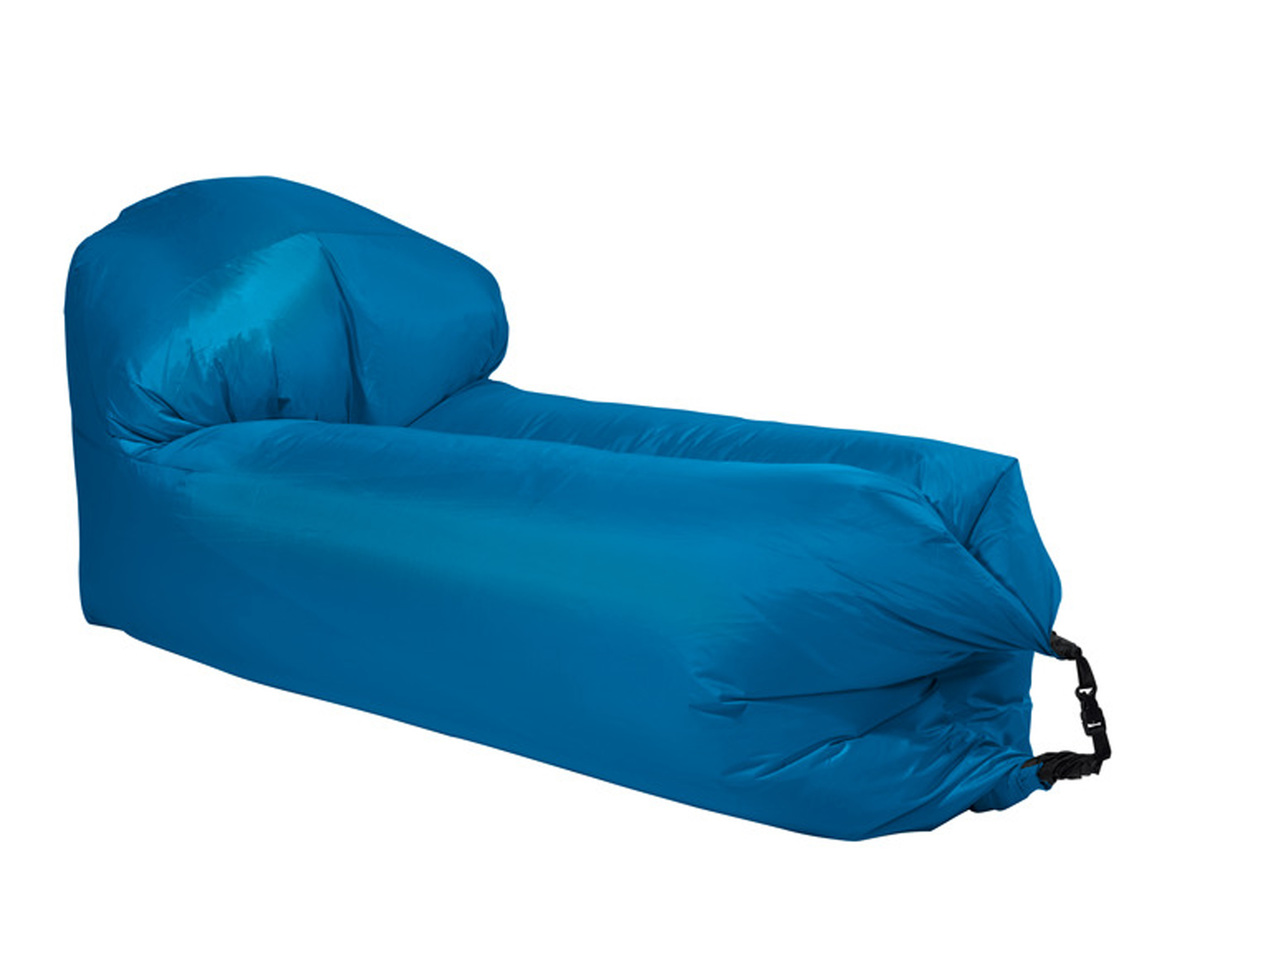 Air lounger lidl Lidl is